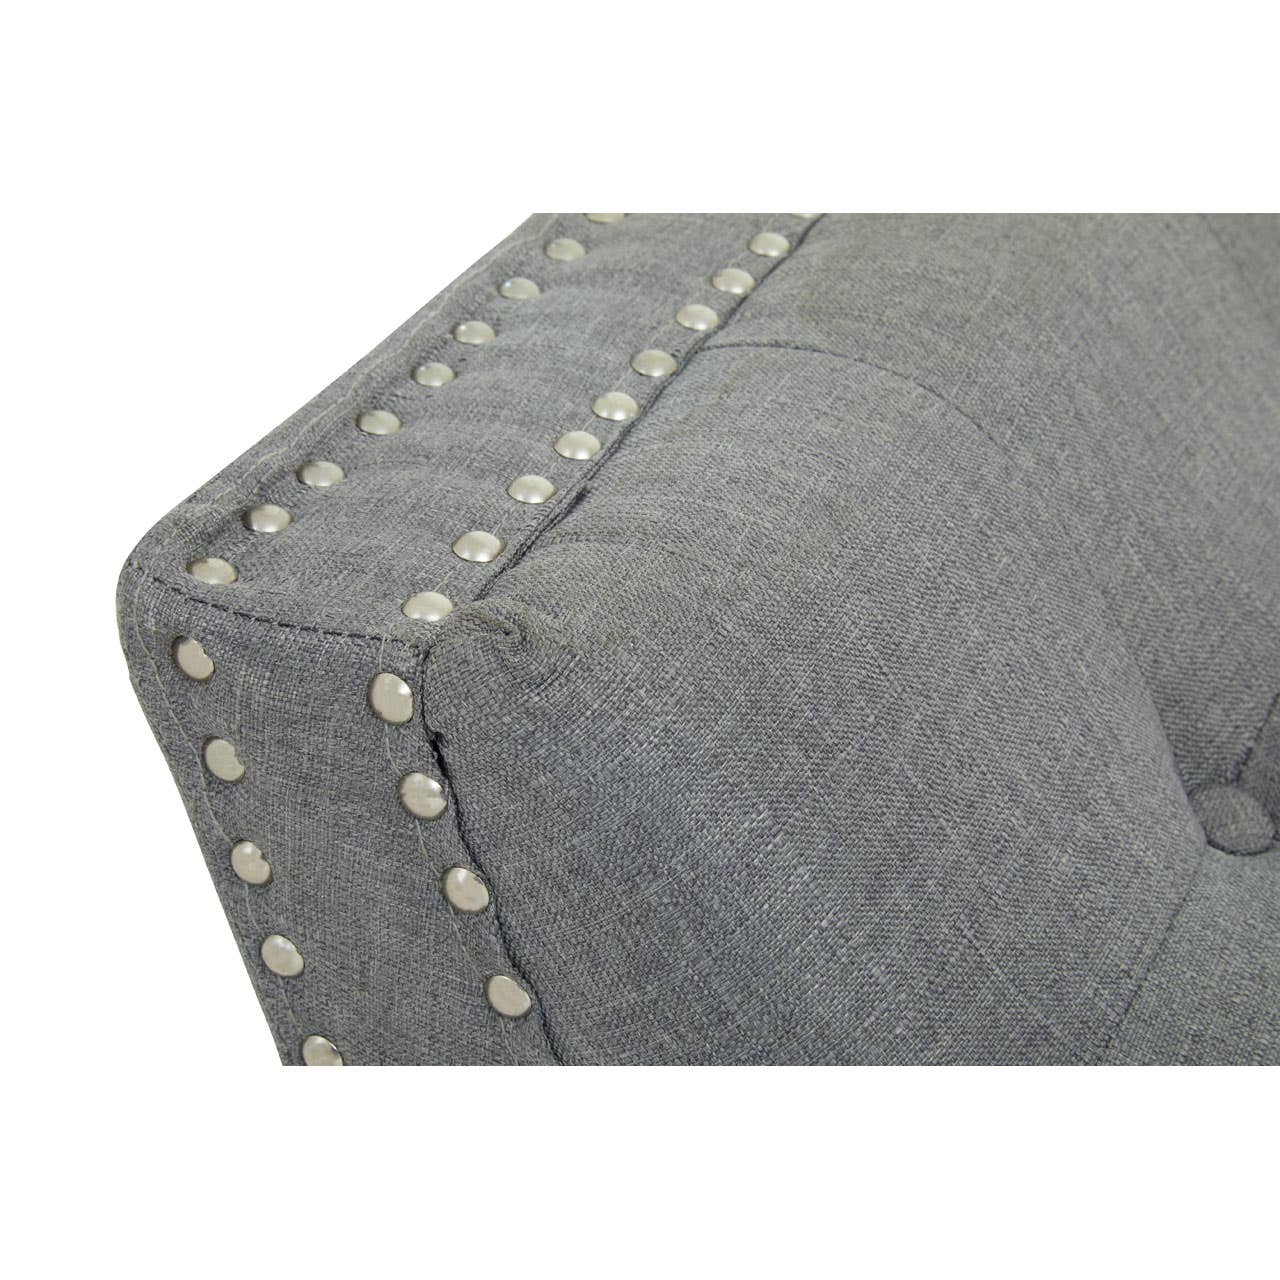 Duke Dove Grey Button-Tufted Bench With Sloping Arms & Stud Detail